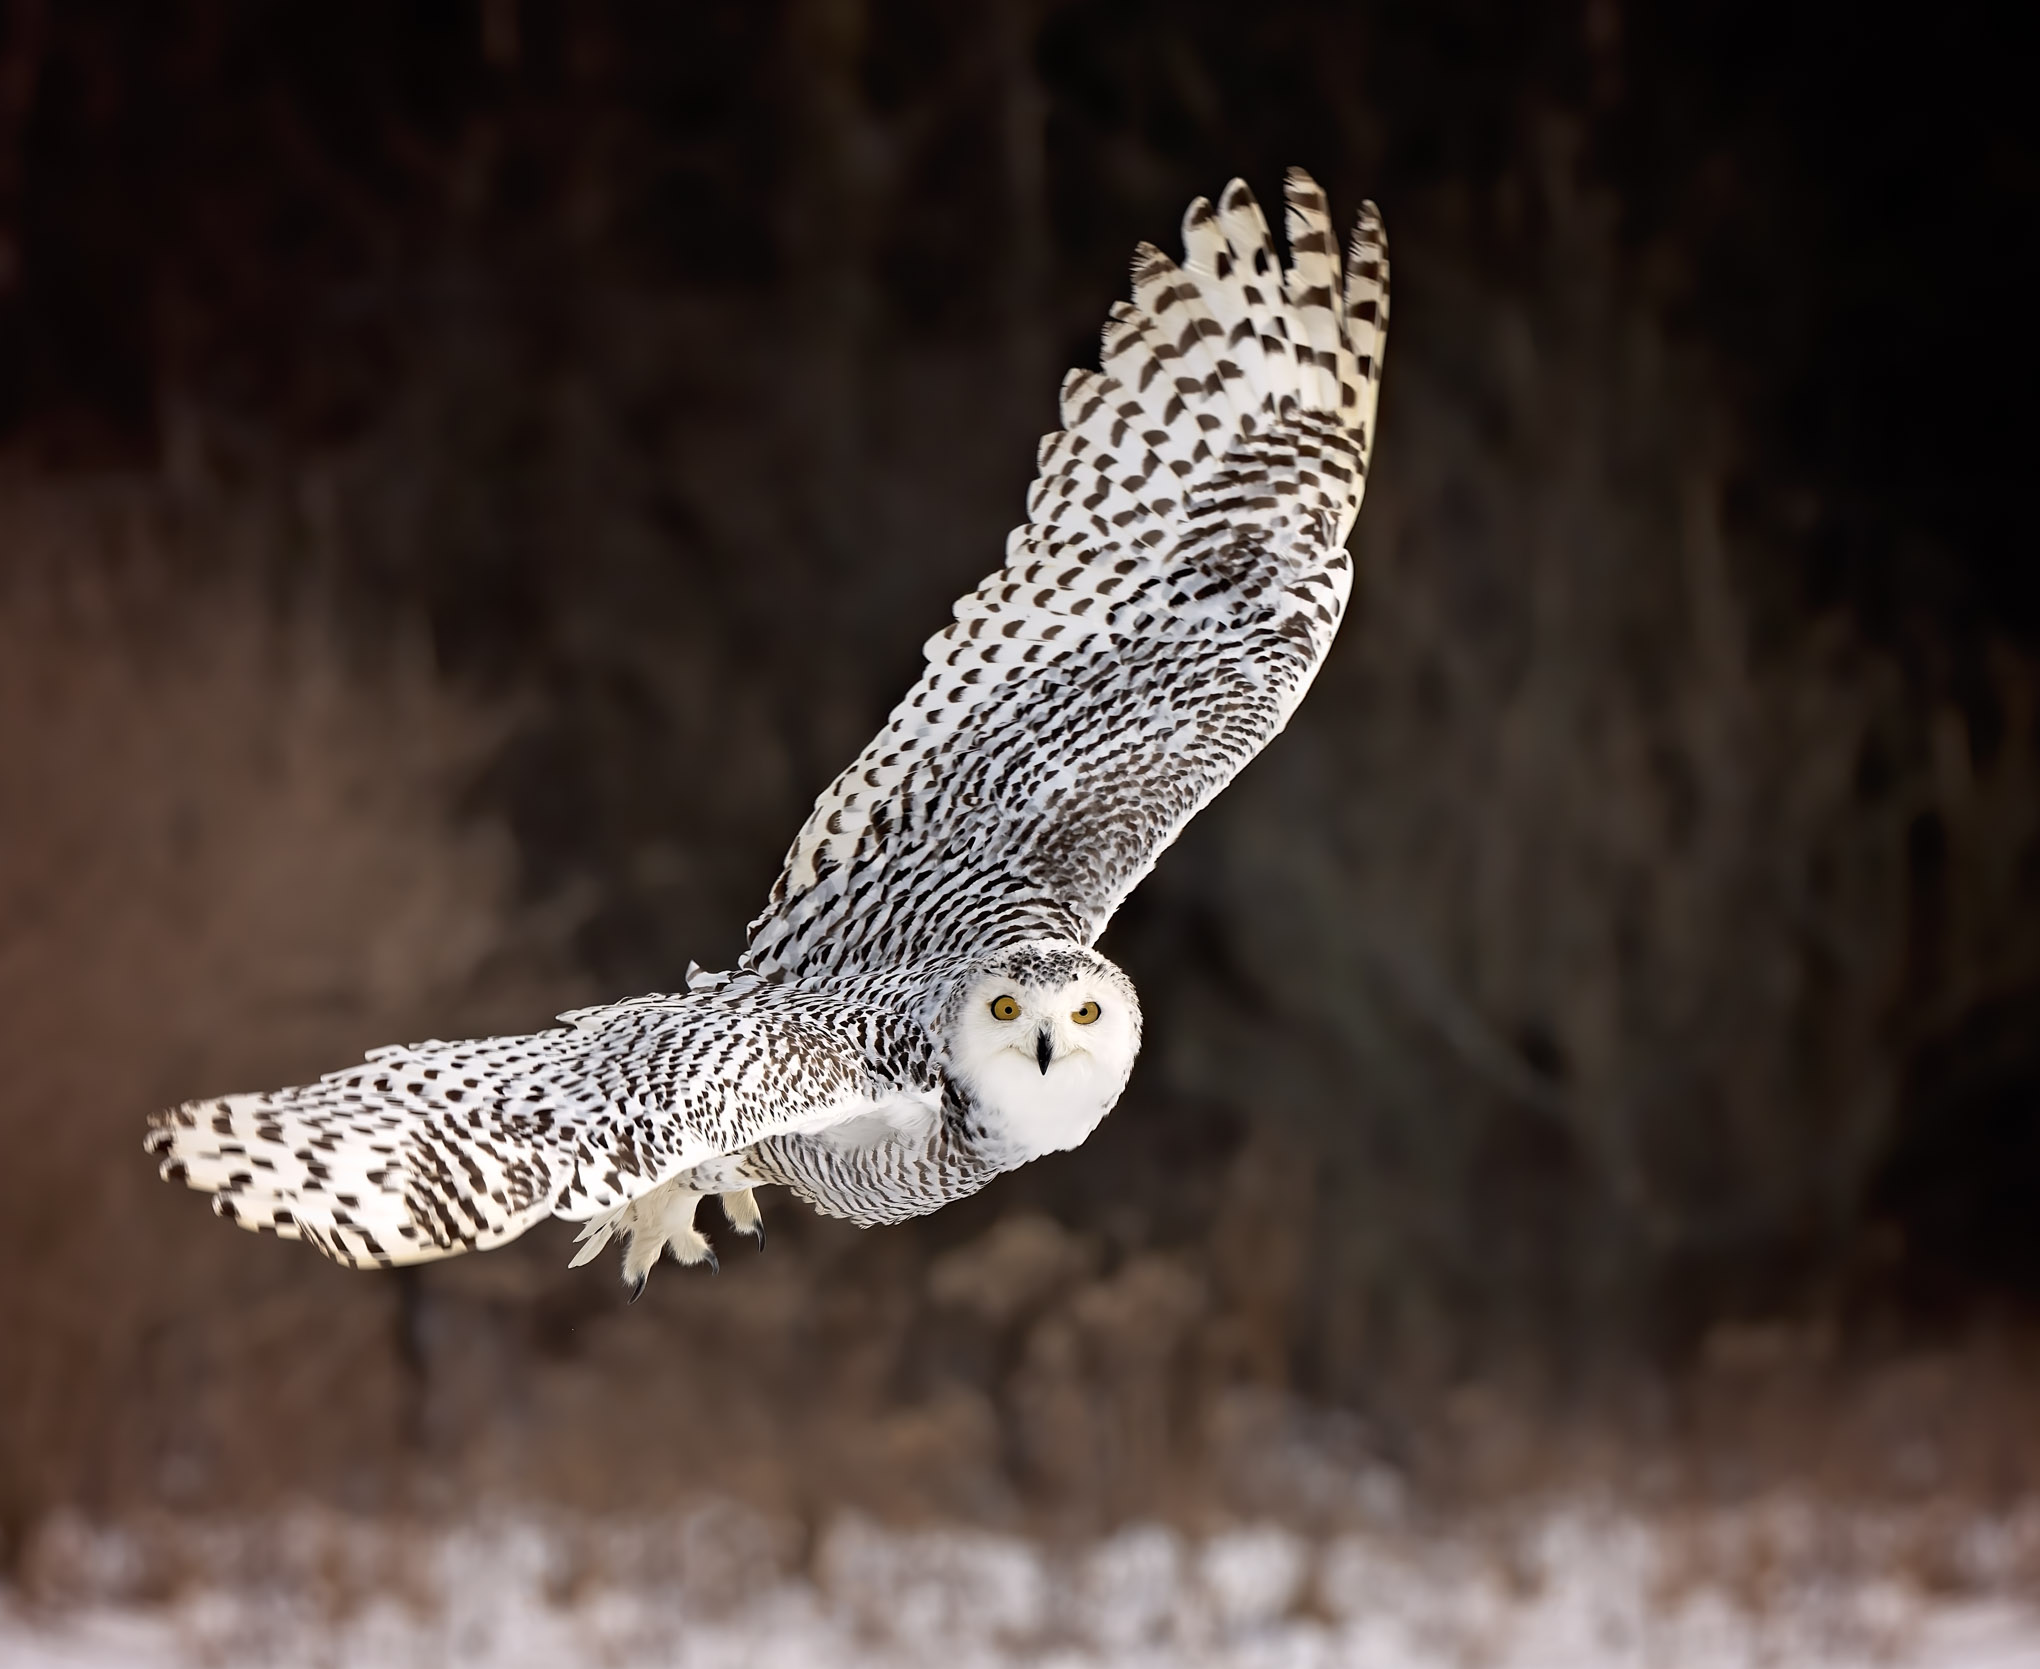 Practical Bird Photography Tips for Capturing Action